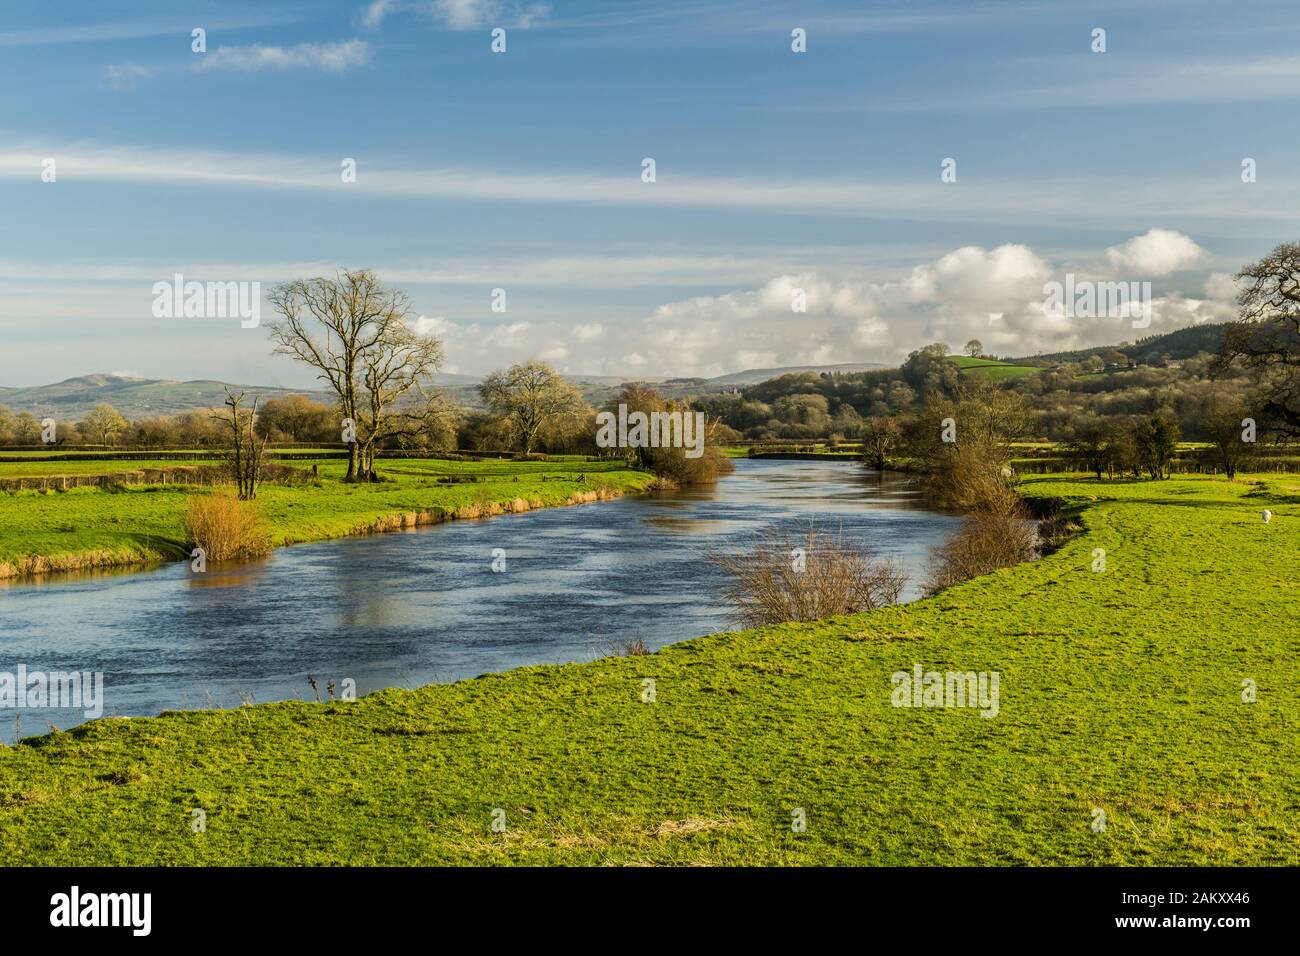 Looking up the River Tywi from Dryslwyn Castle Bridge in the Tywi Valley, Carmarthenshire, south West Wales. A bright sunny day and beautiful day. Stock Photo